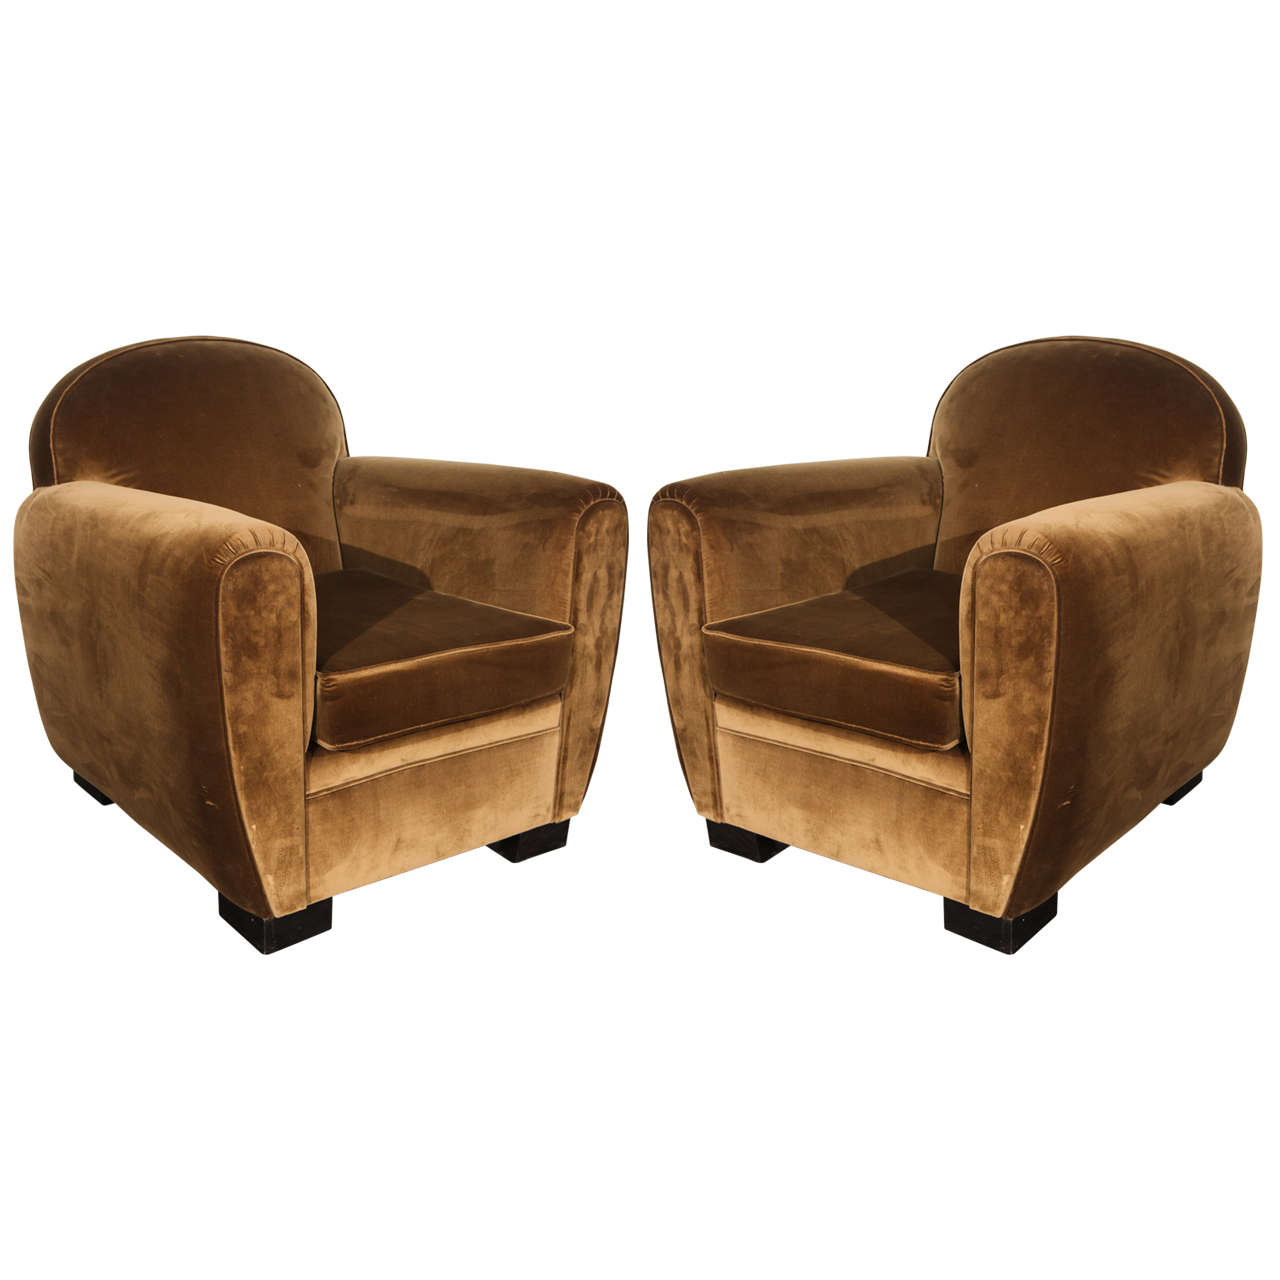 Classy Pair of French Deco Club Chairs